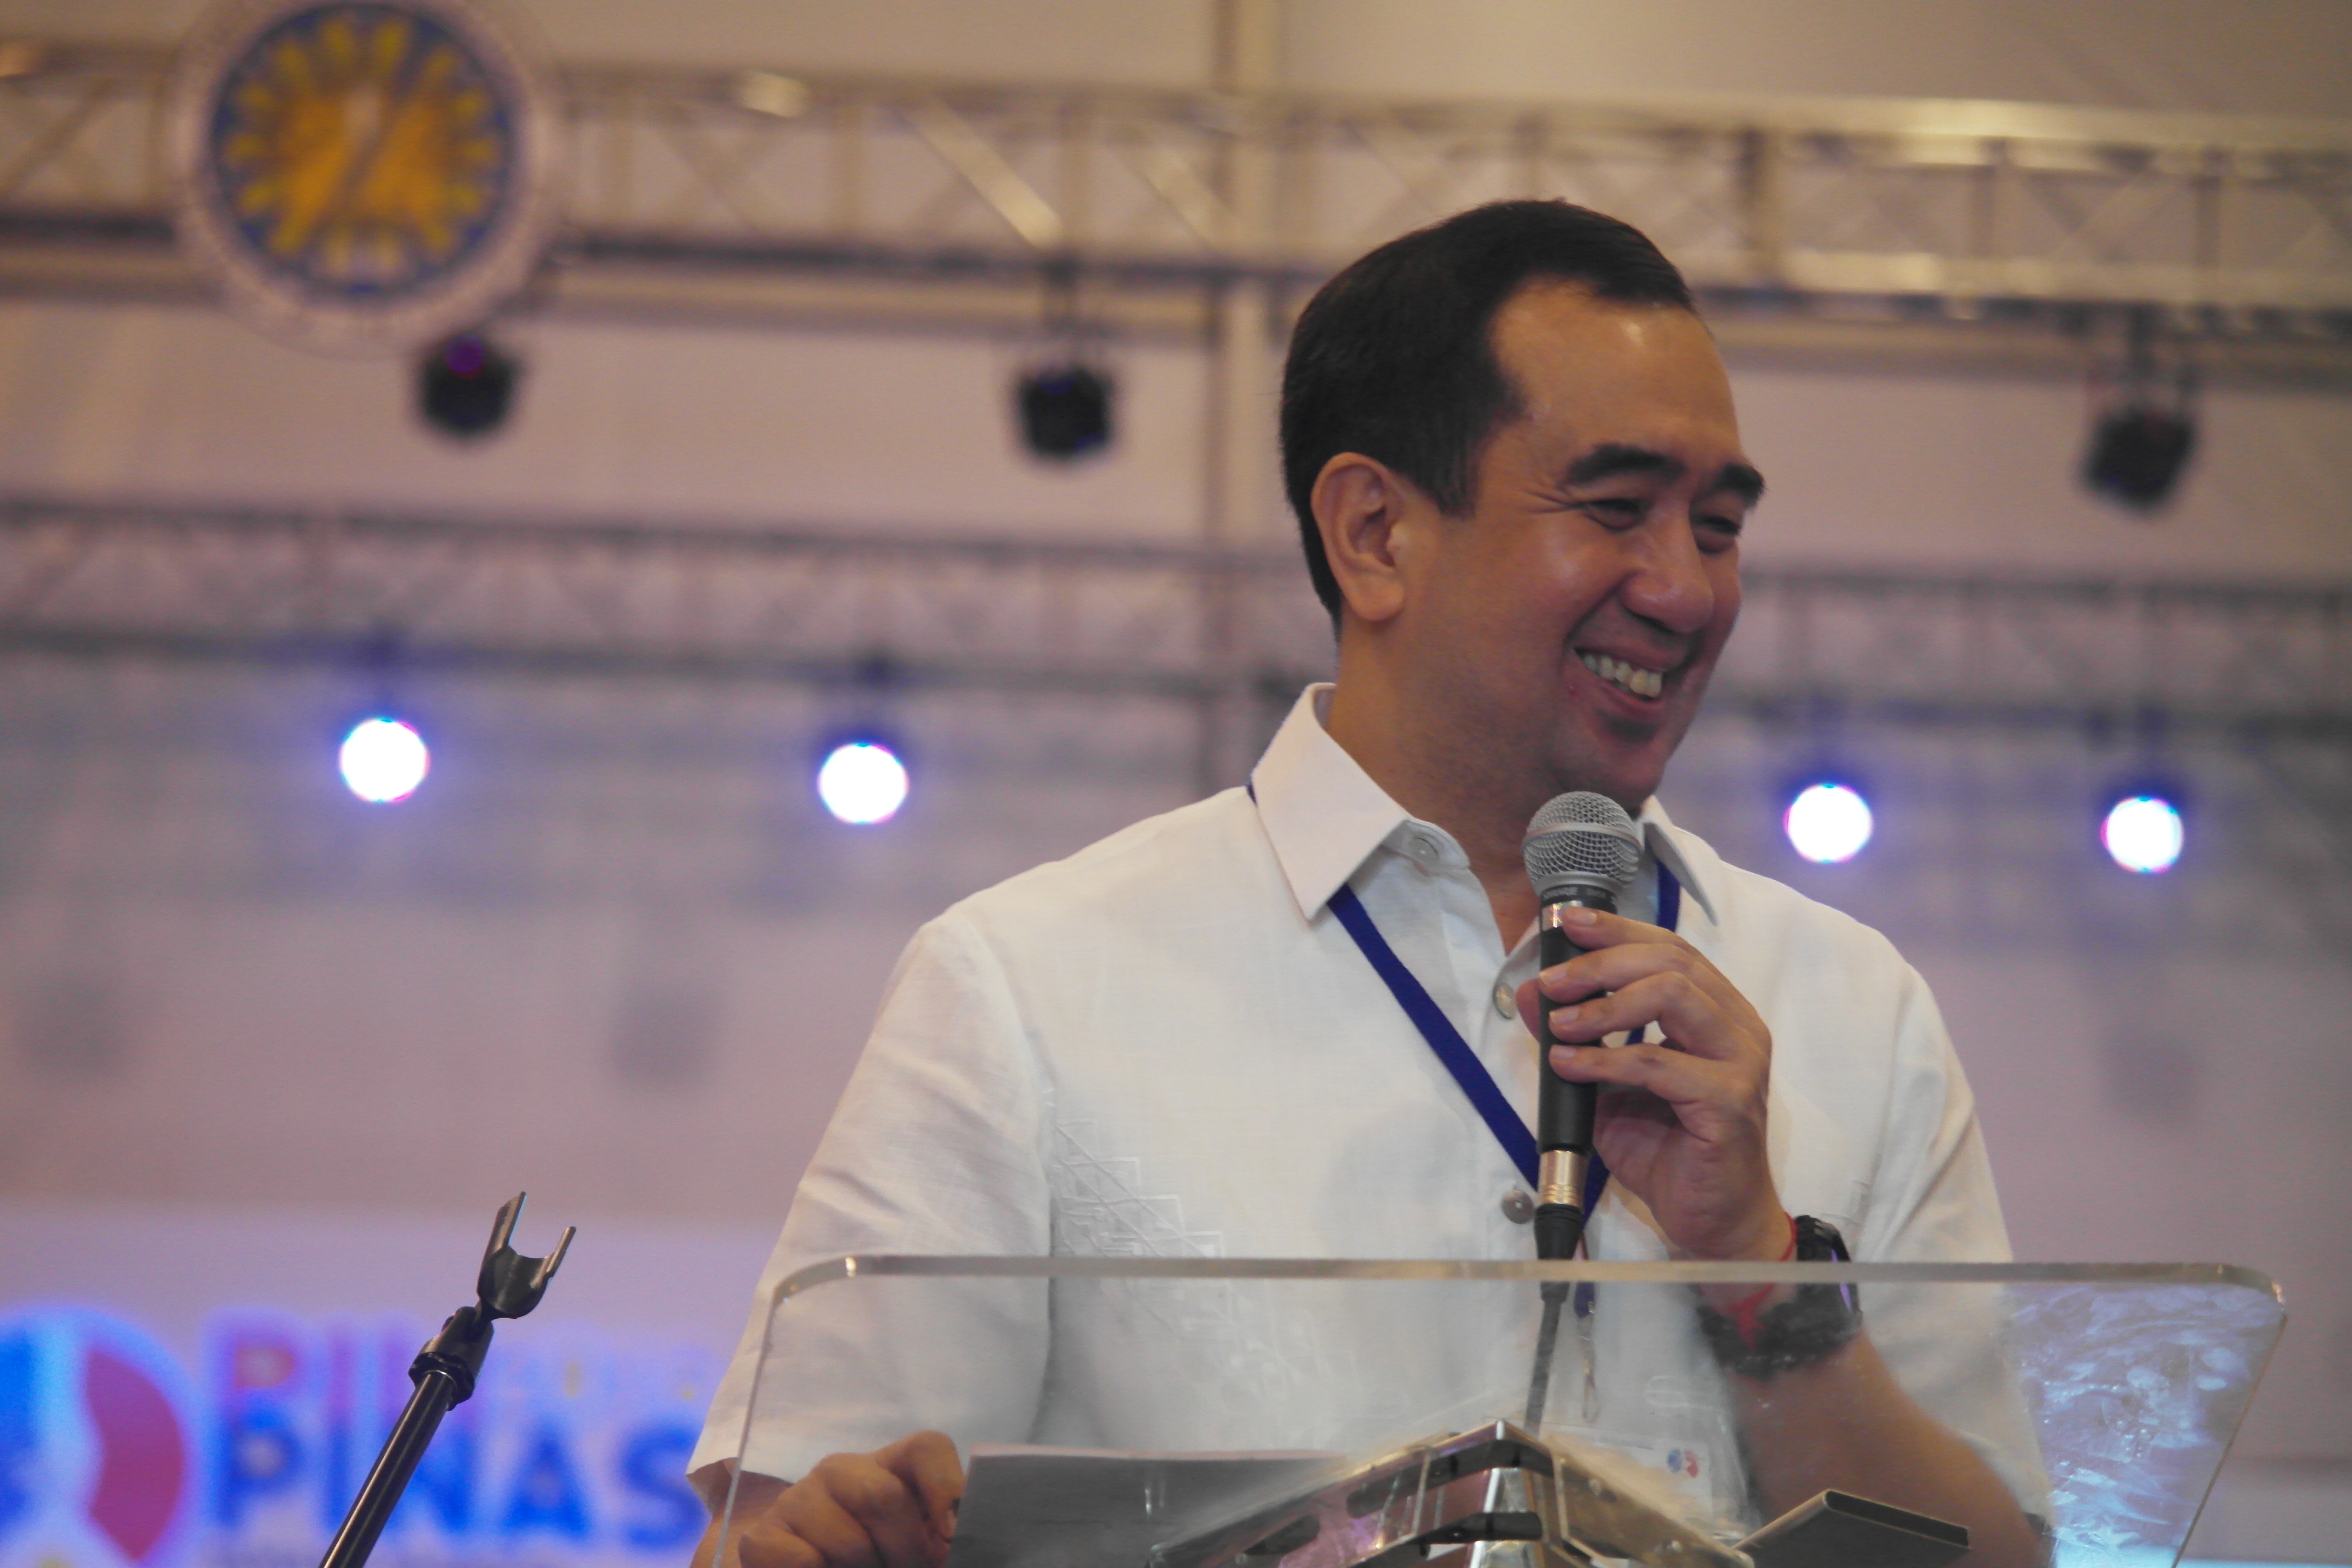 Comelec chair Andres Bautista says the poll body is trying to outperform what it has done in previous elections. (Photo by MARIA FEONA IMPERIAL)